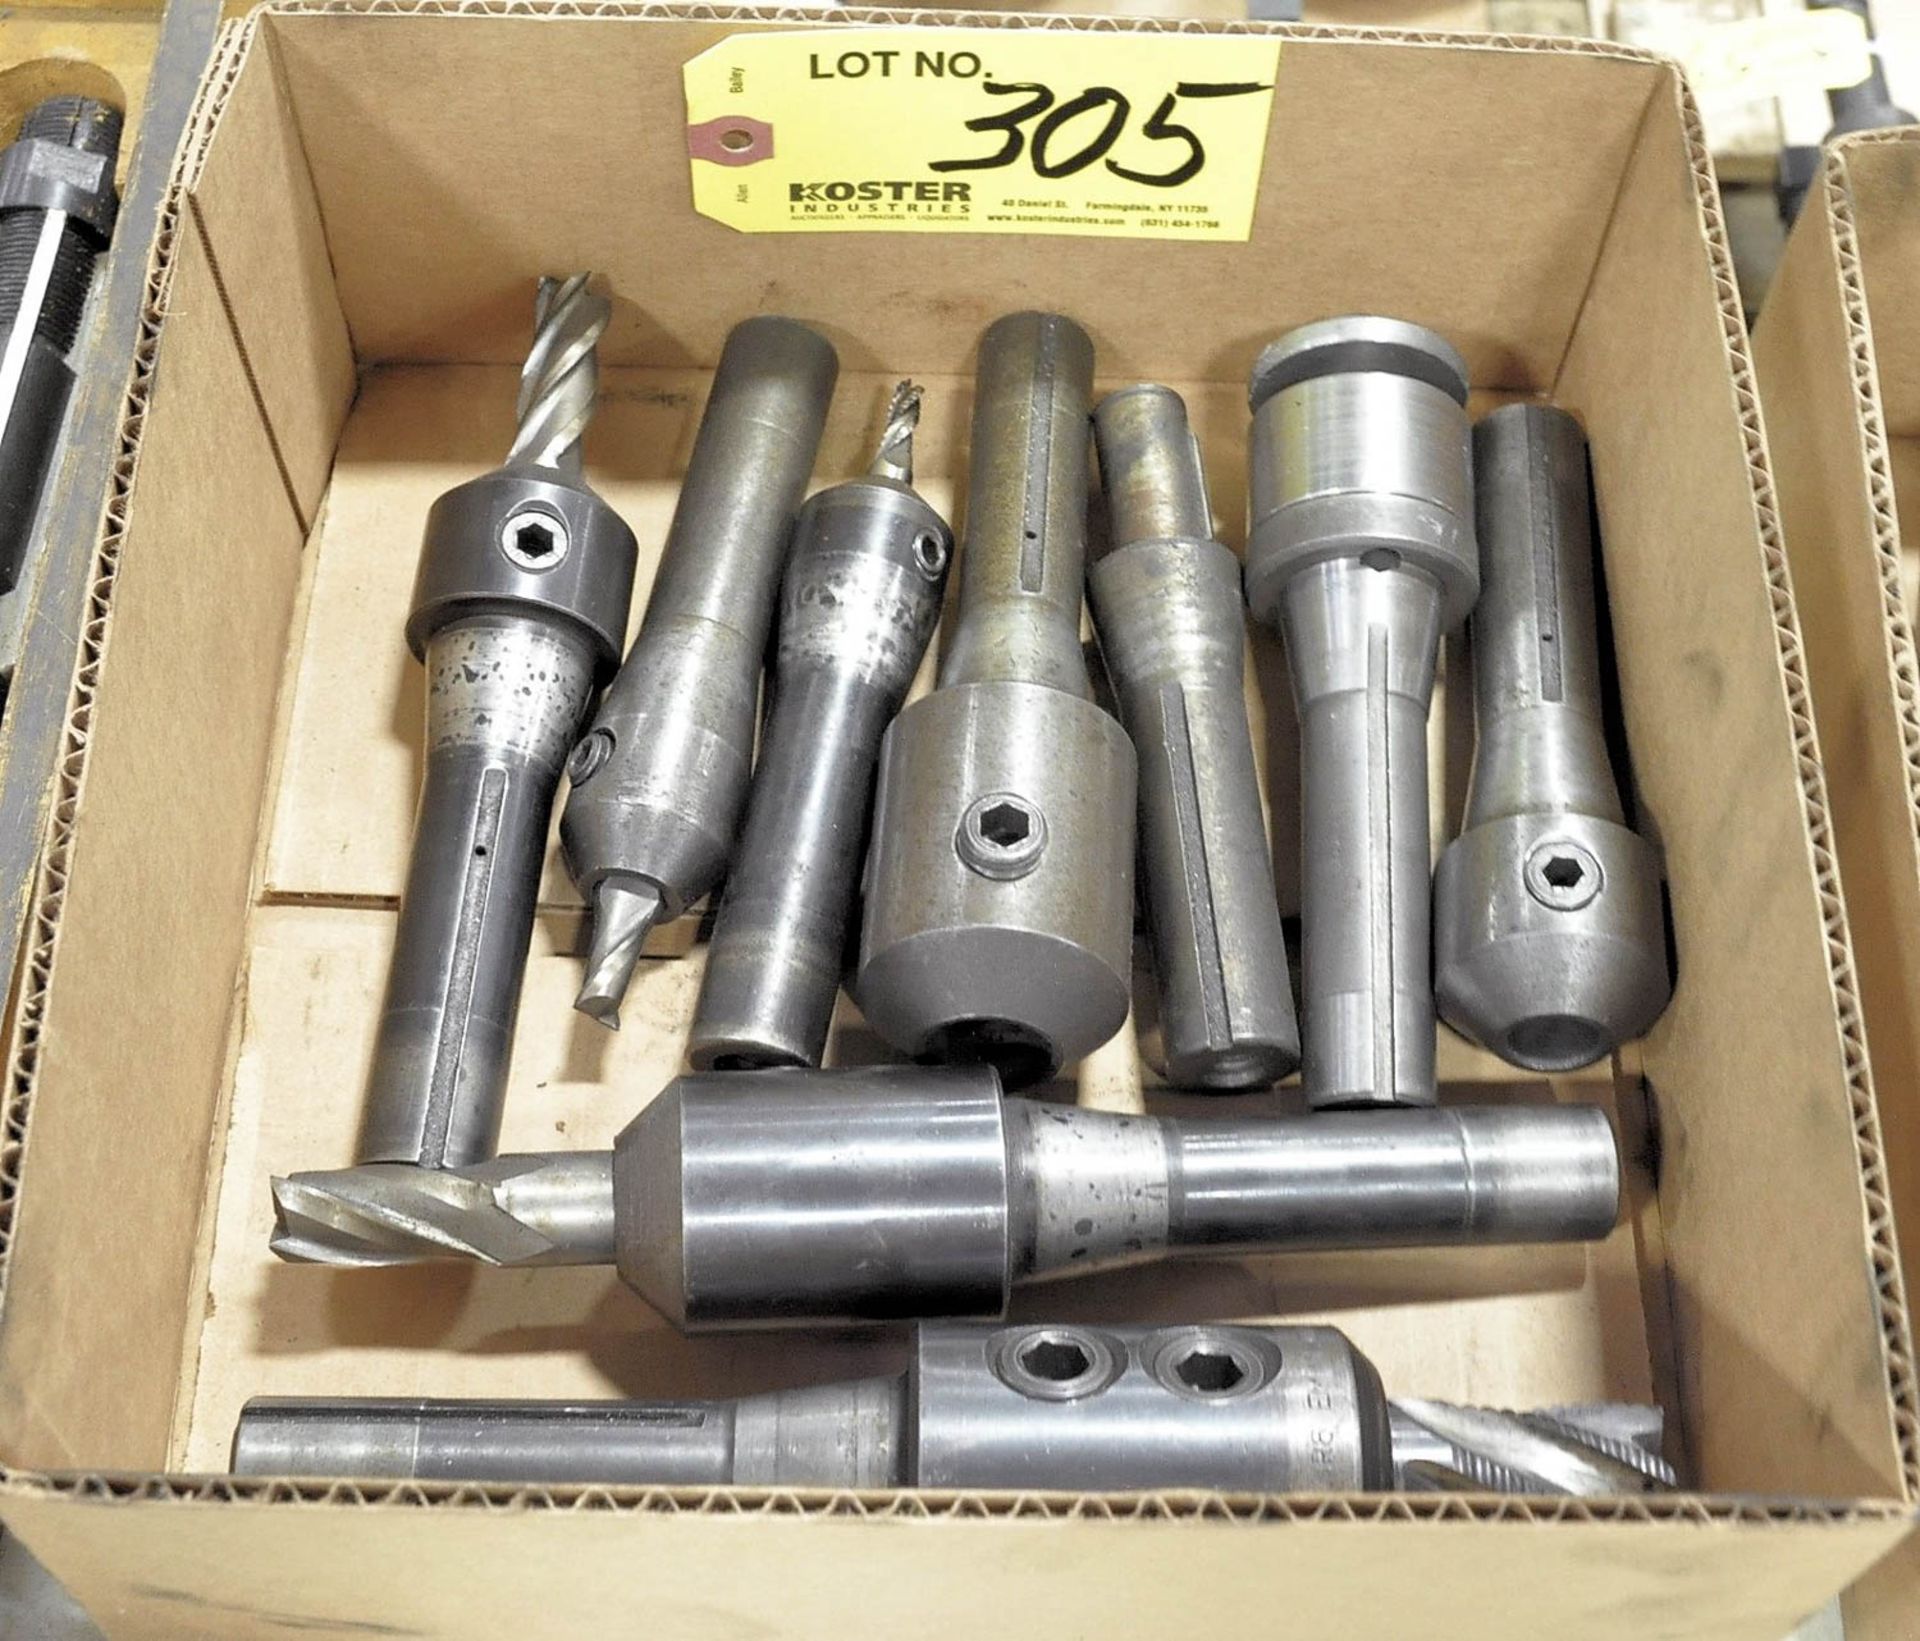 Lot of R8 Tool Holders in Box